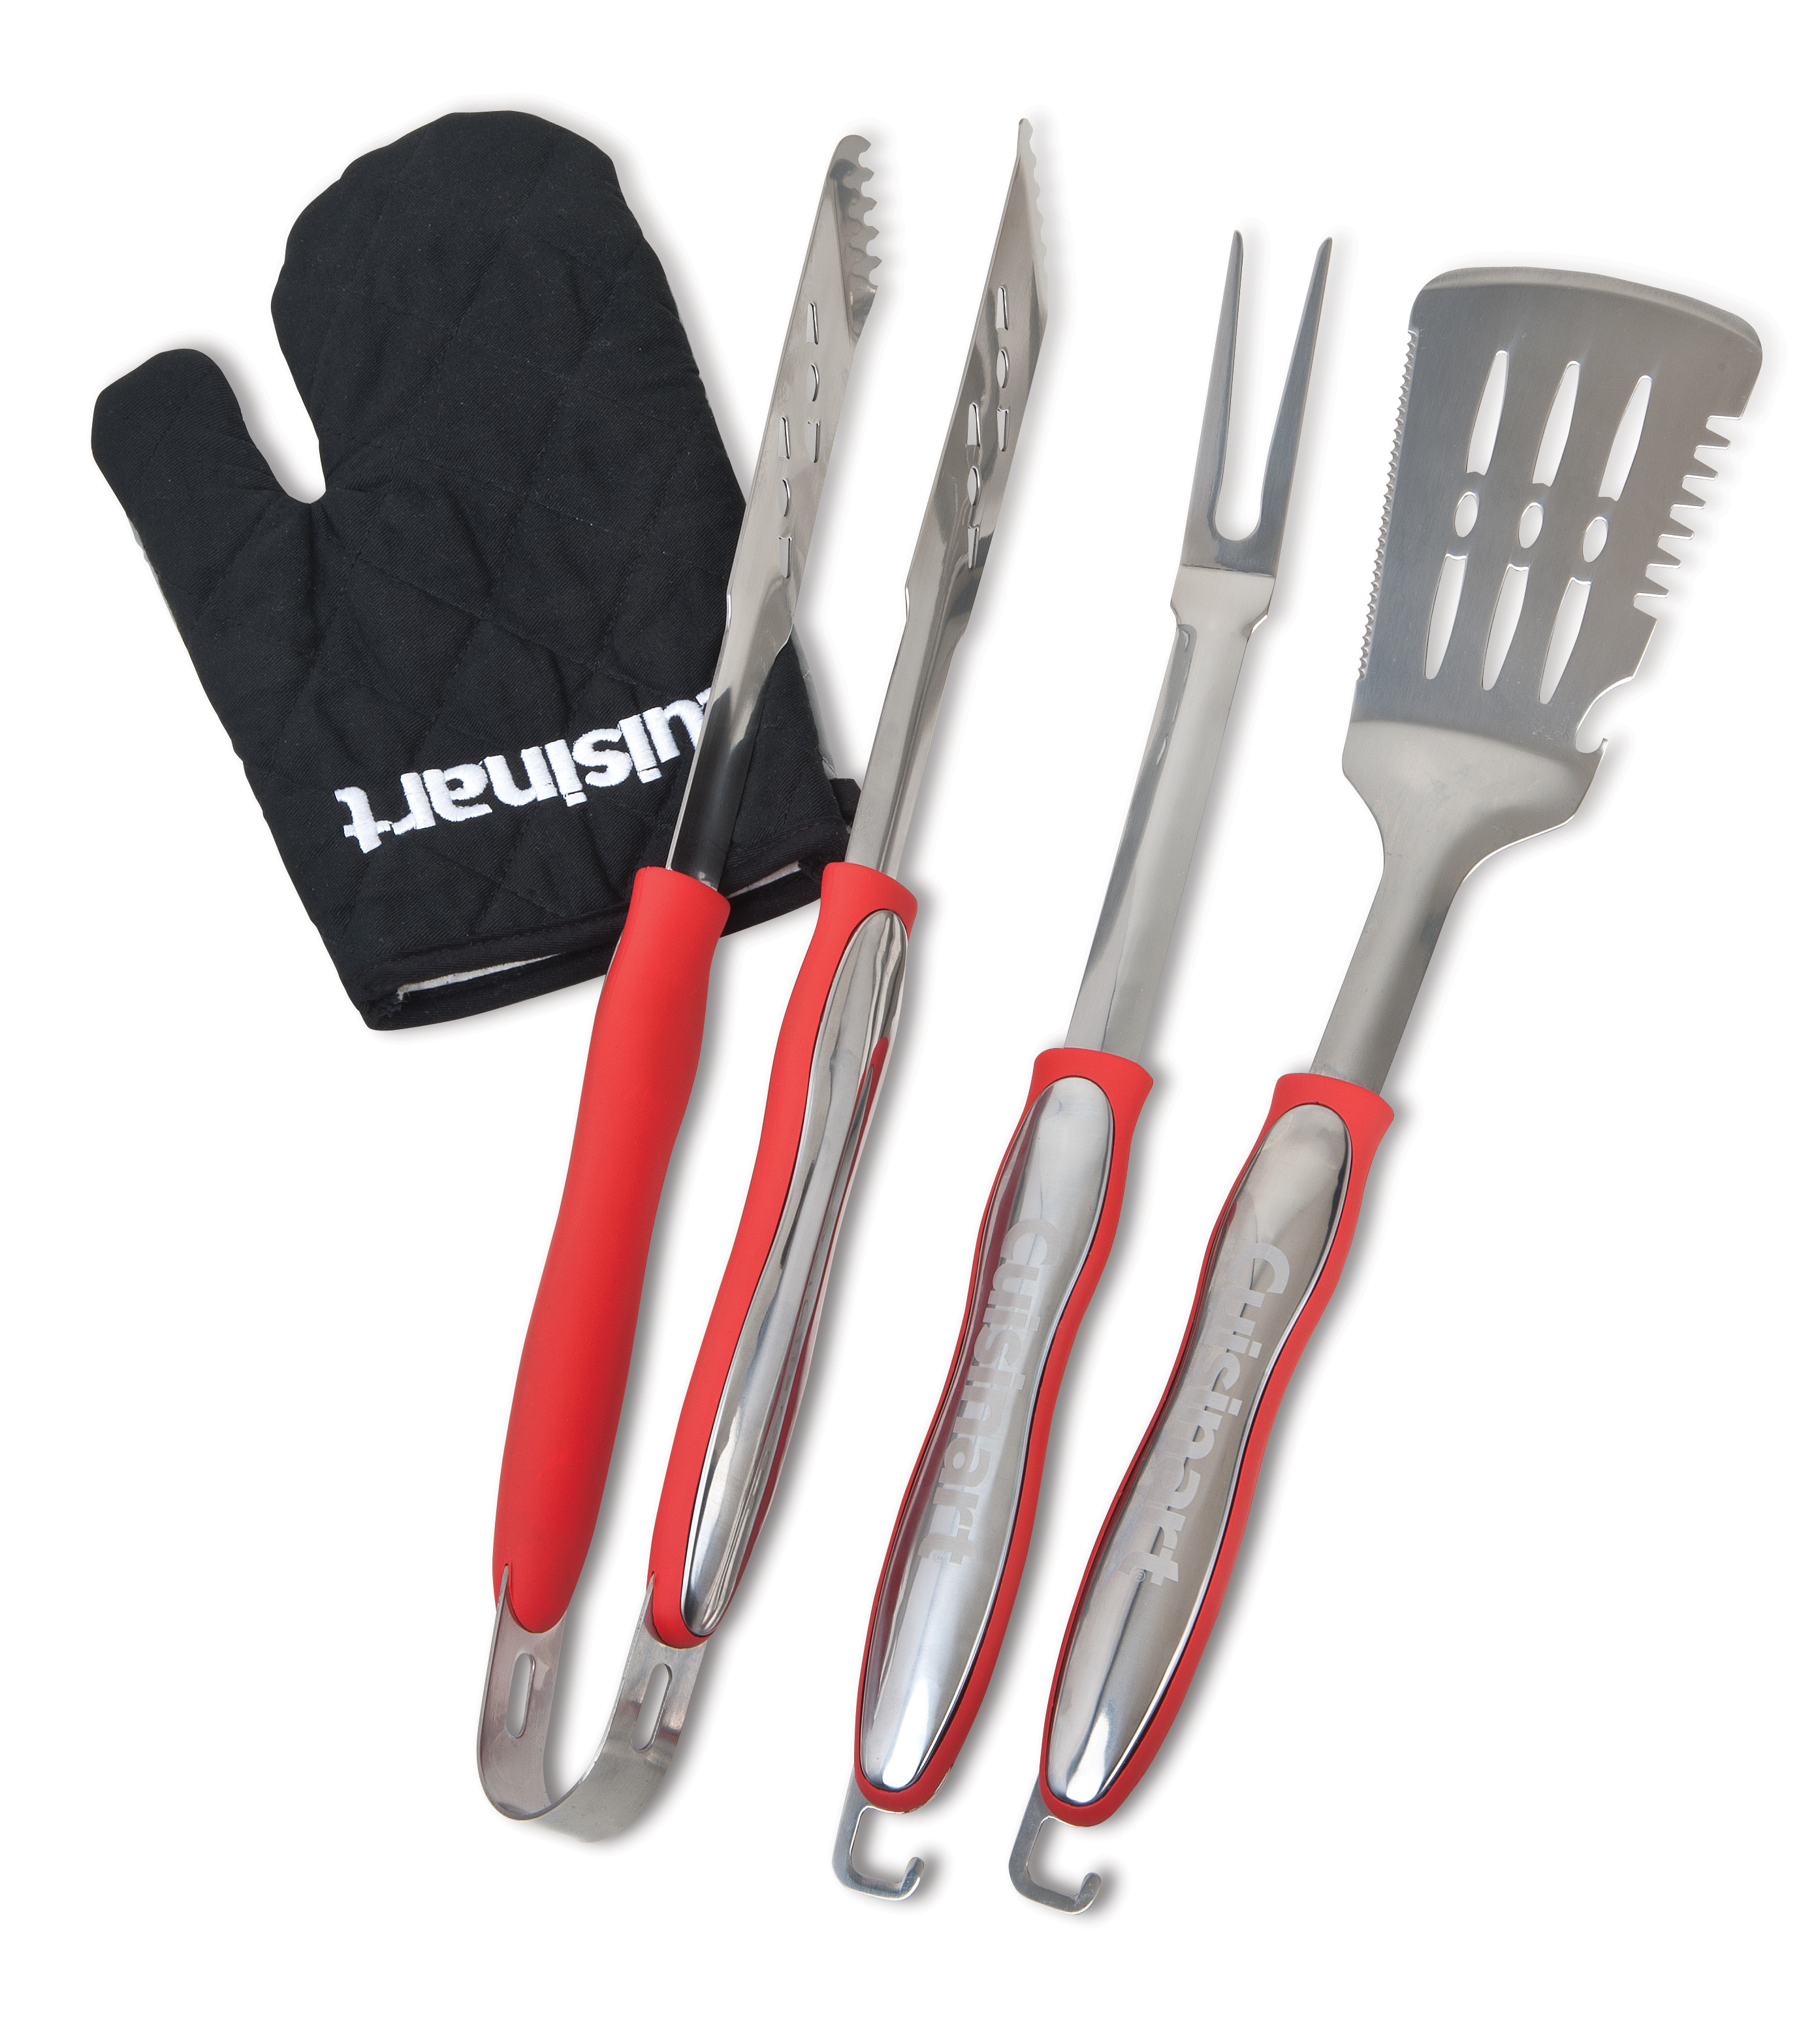 Cuisinart 4-Piece Grill Tool Set With Grill Glove - CGS-134 - image 1 of 3